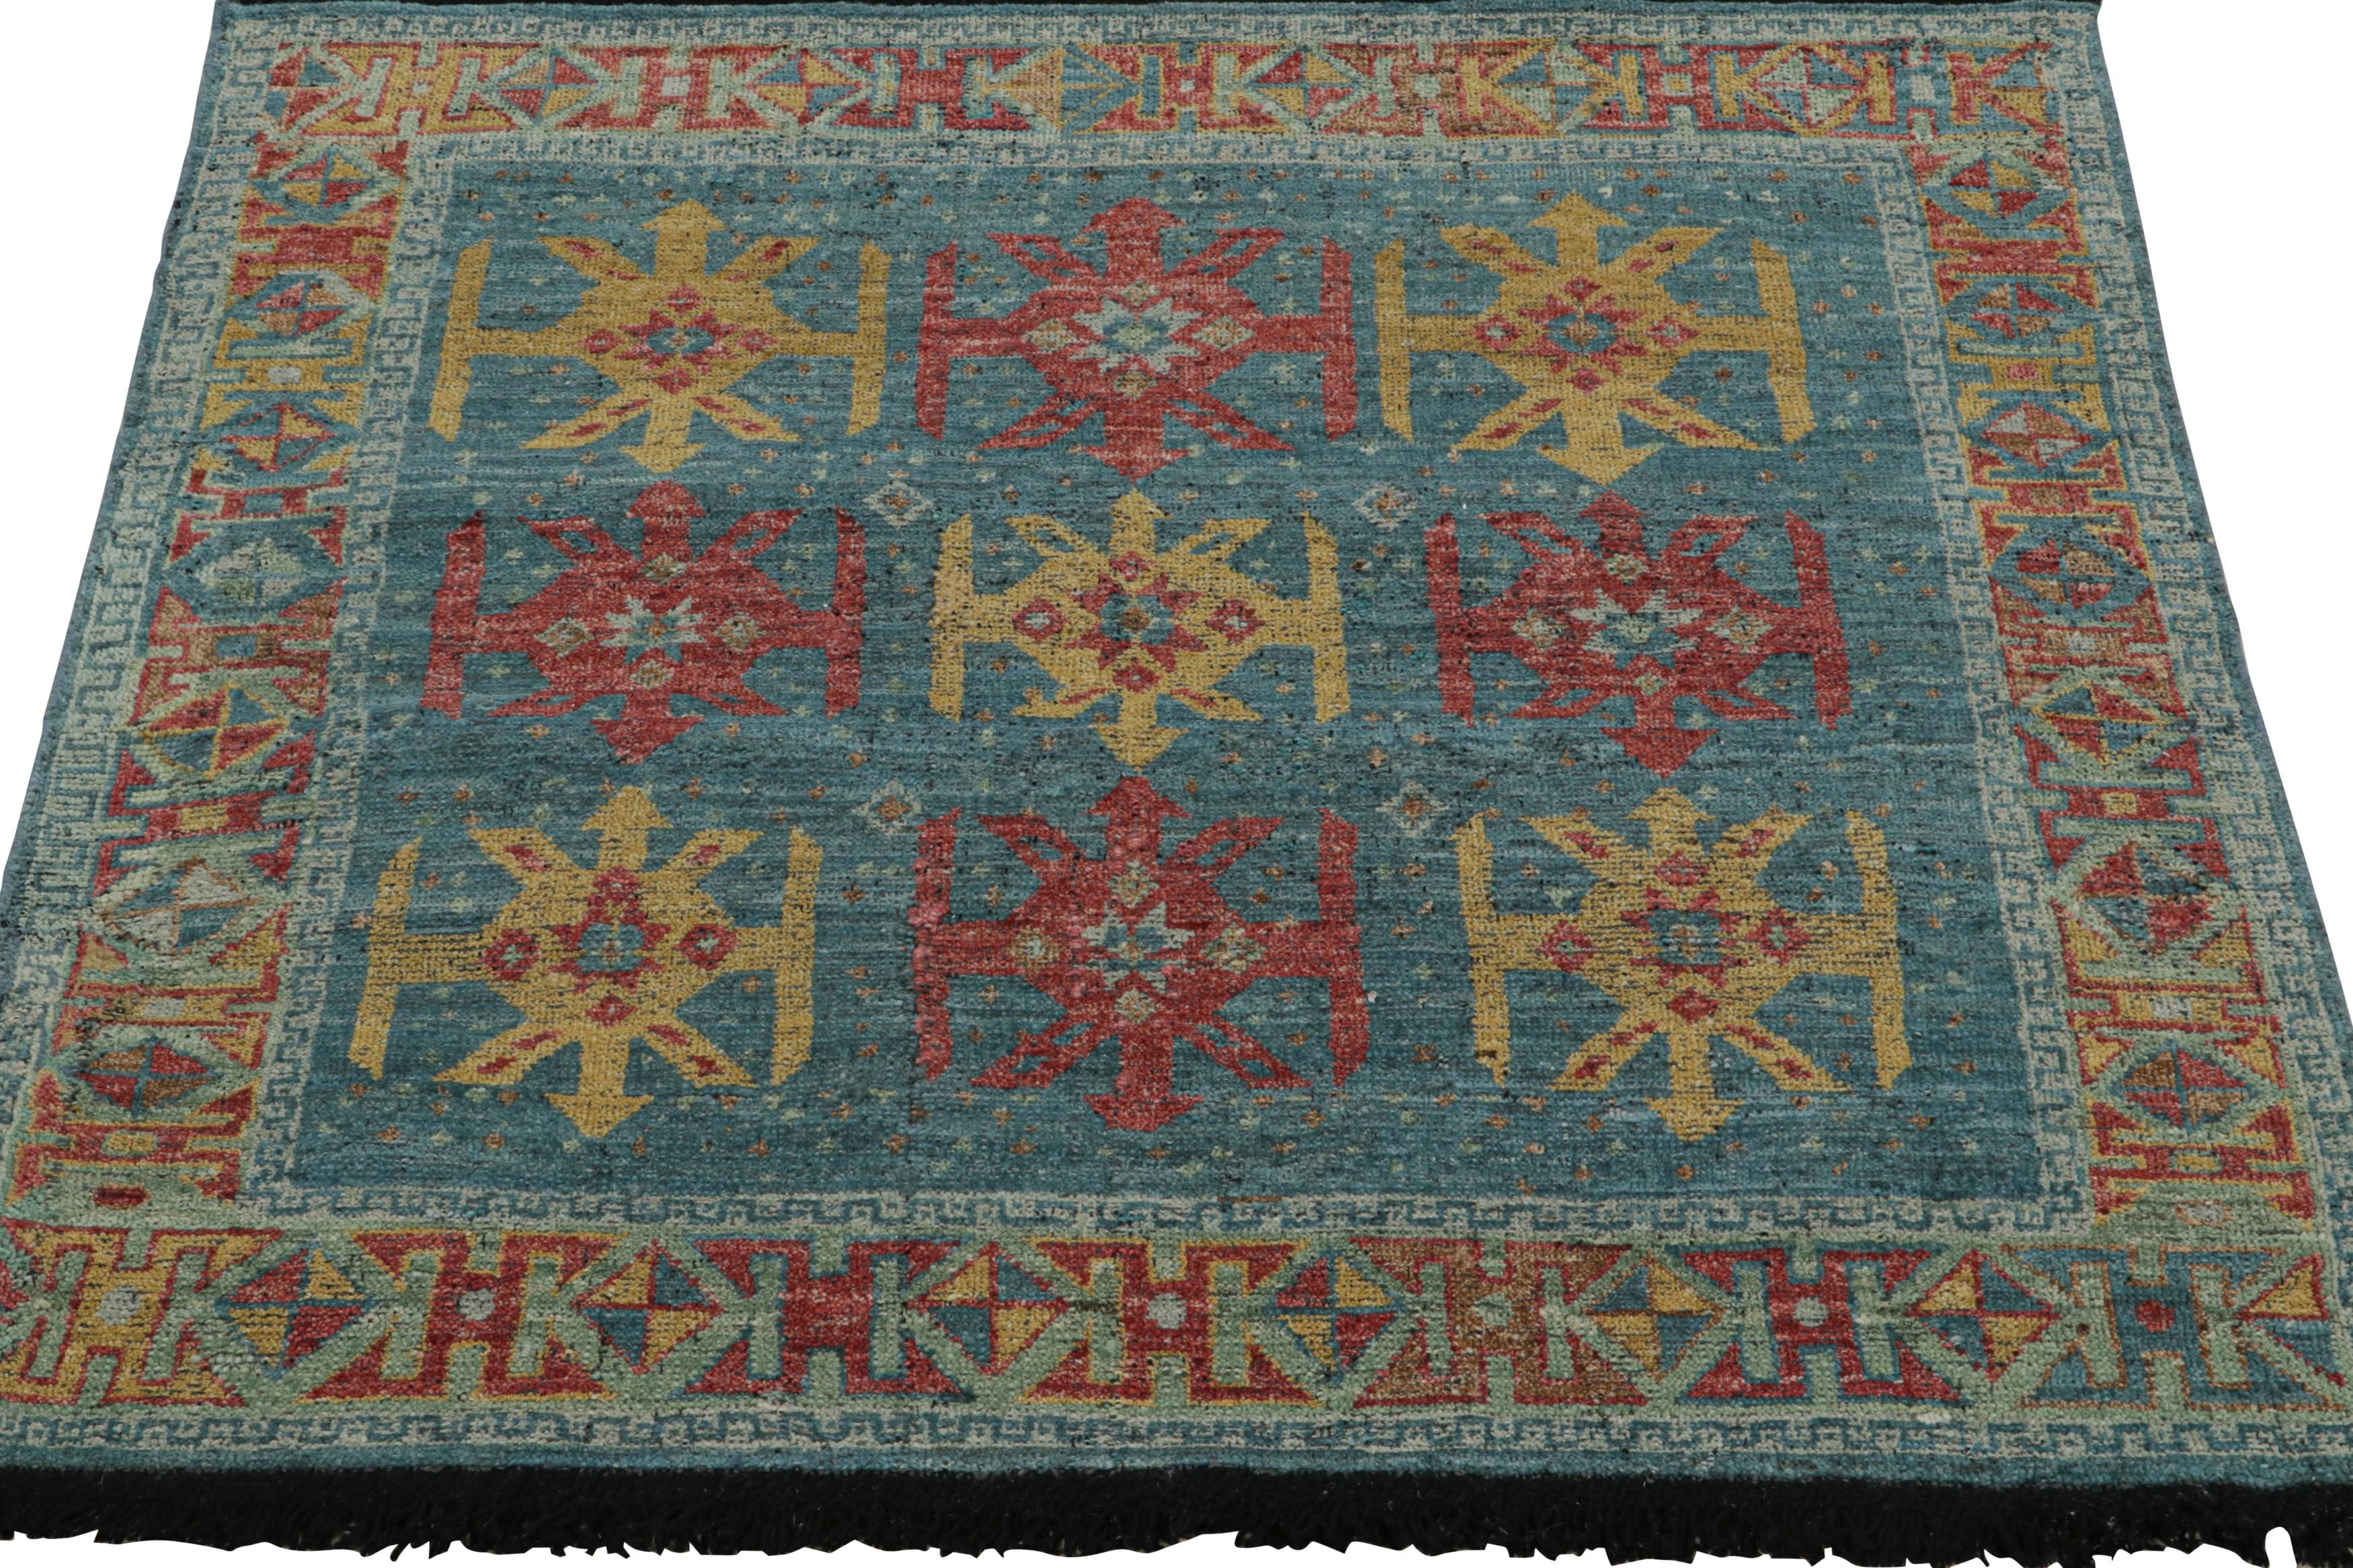 Indian Rug & Kilim’s Tribal Style Custom Rug in Blue, Red & Gold Geometric Patterns For Sale